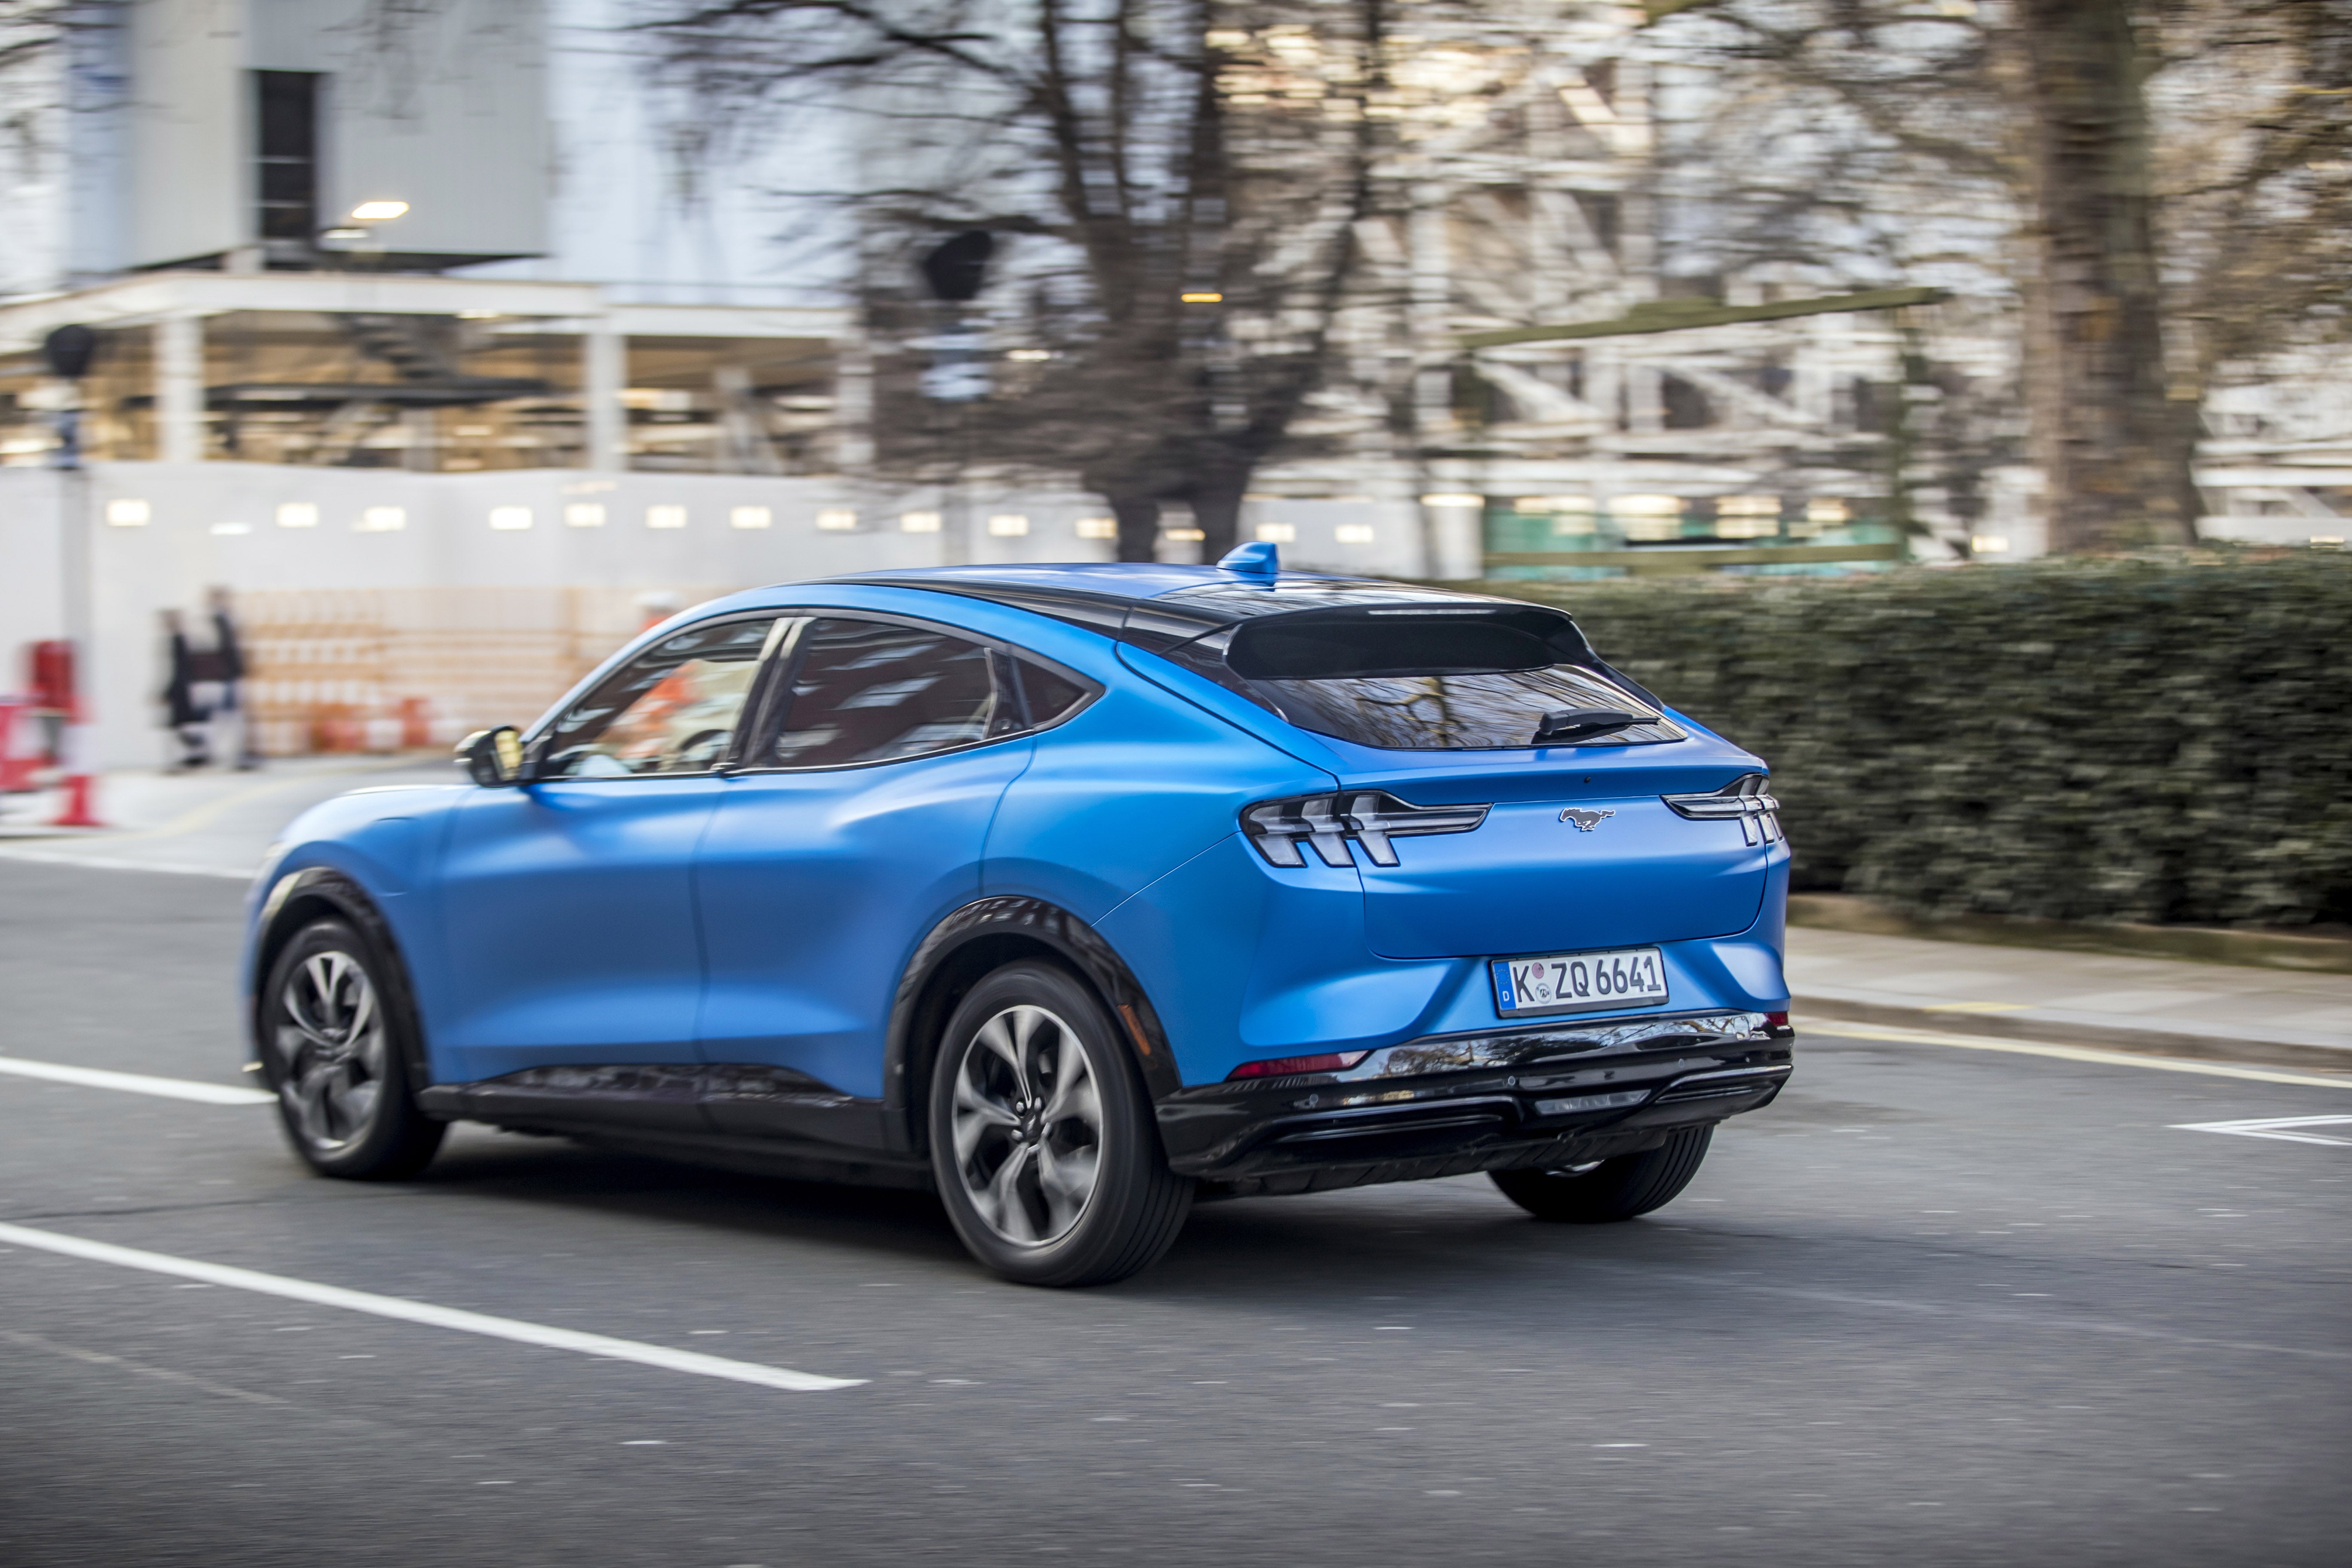 Ford Mustang Mach-E Review 2022: rear dynamic